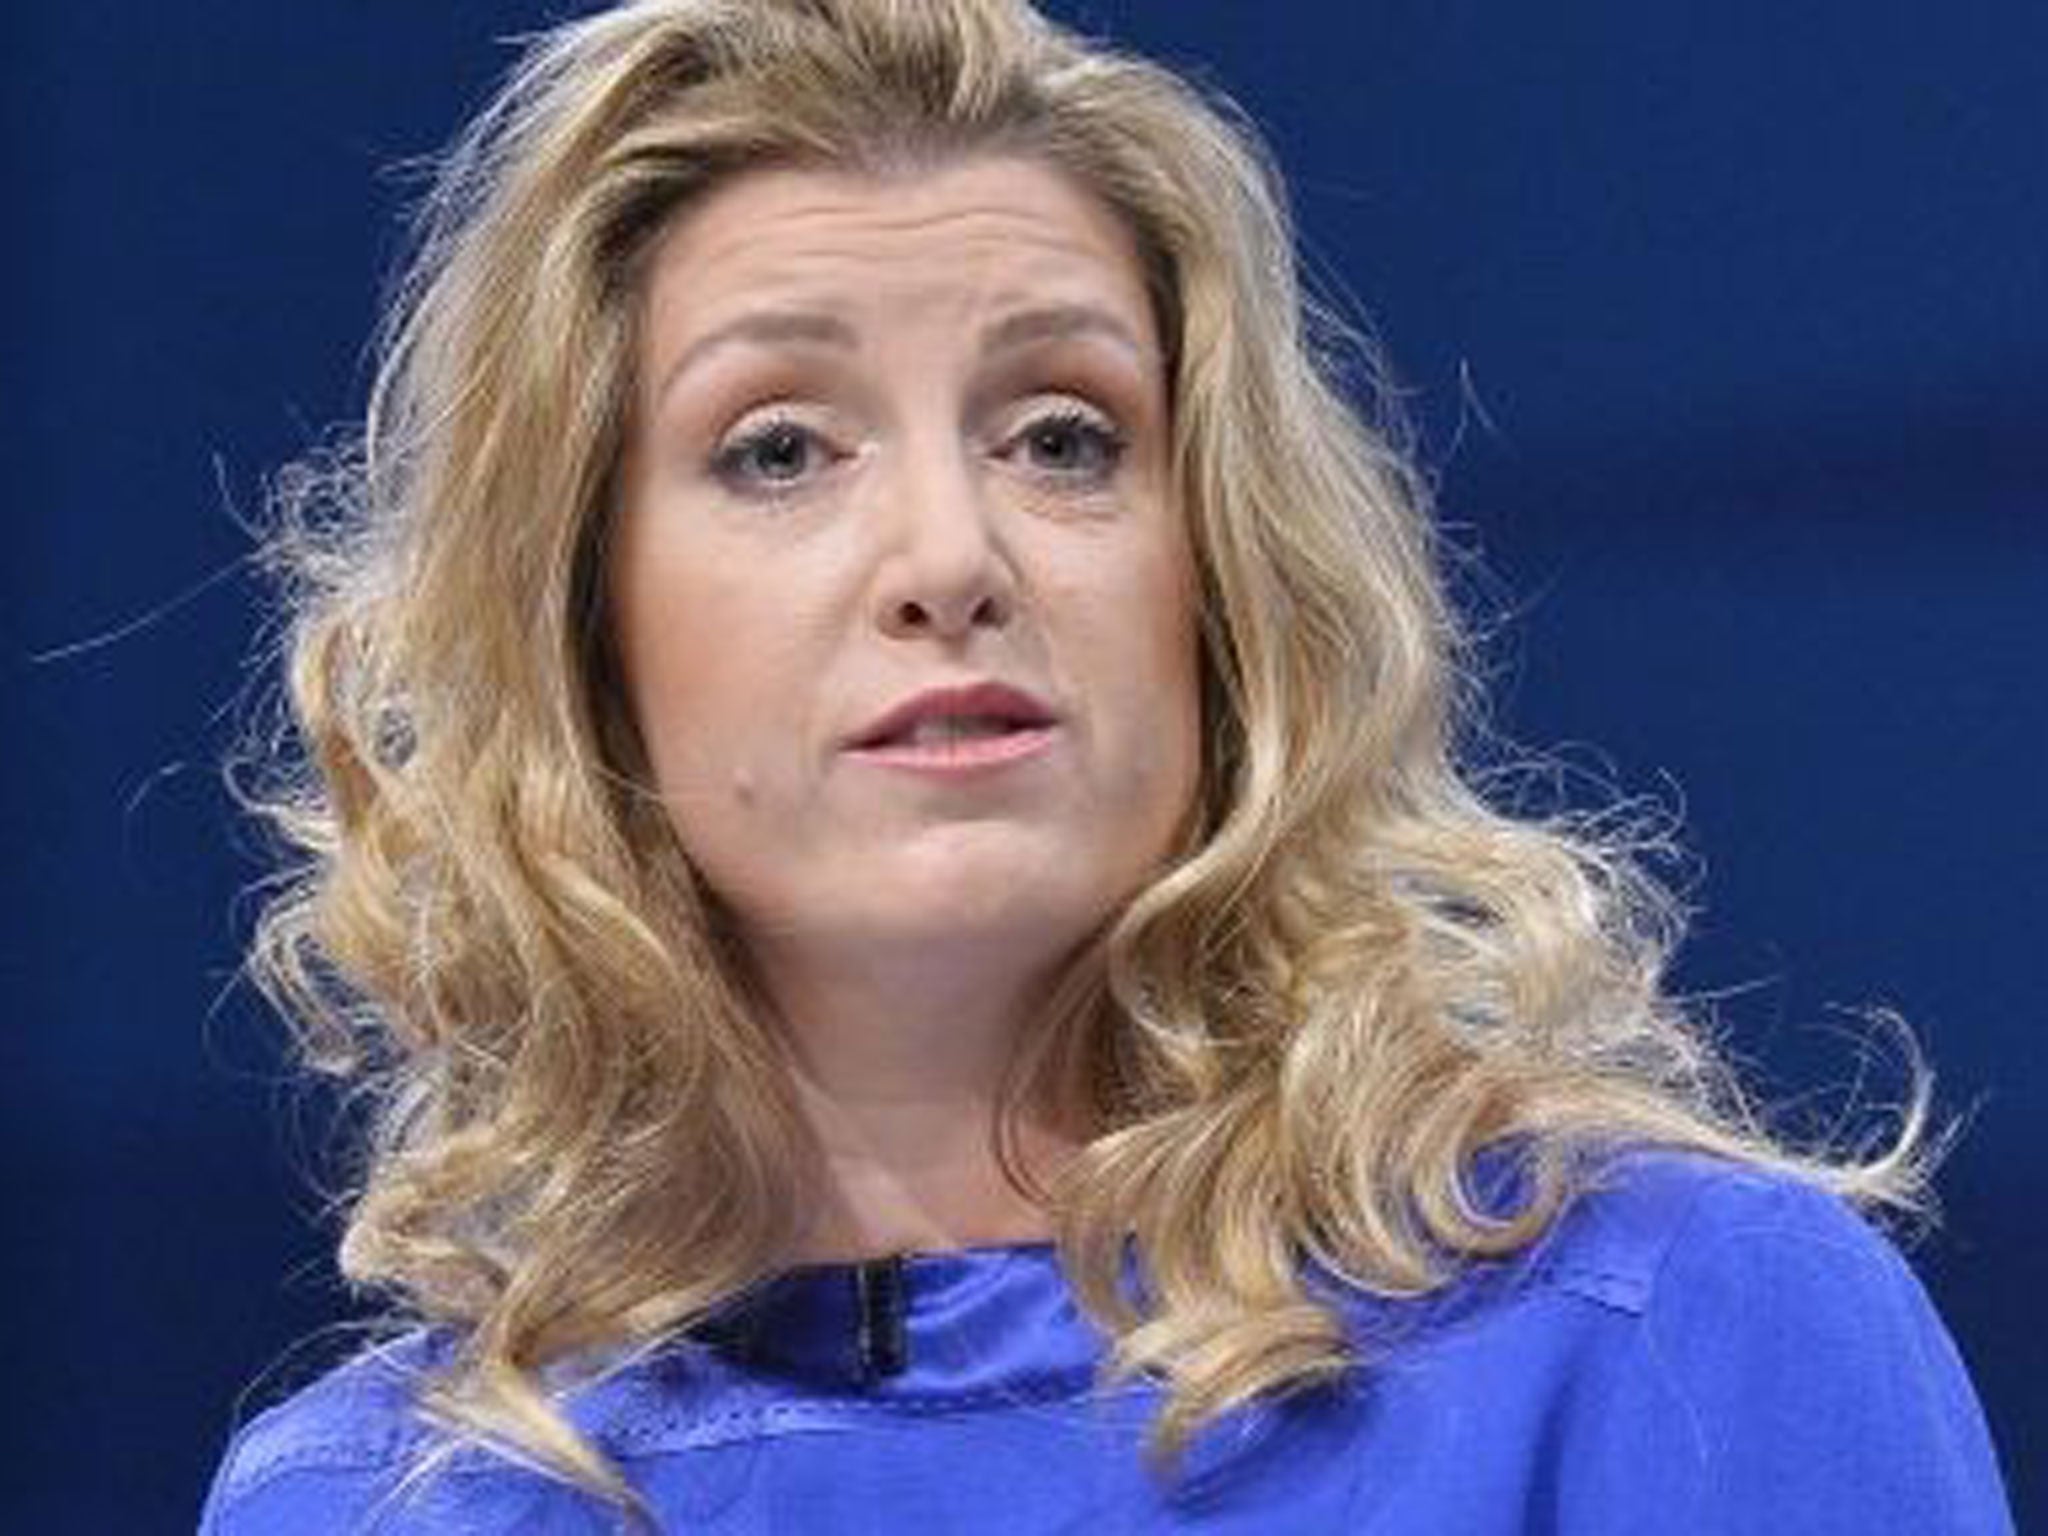 Penny Mordaunt used the word 'c**k' in a speech several times in order to fulfil a bet, not because she cared about poultry welfare